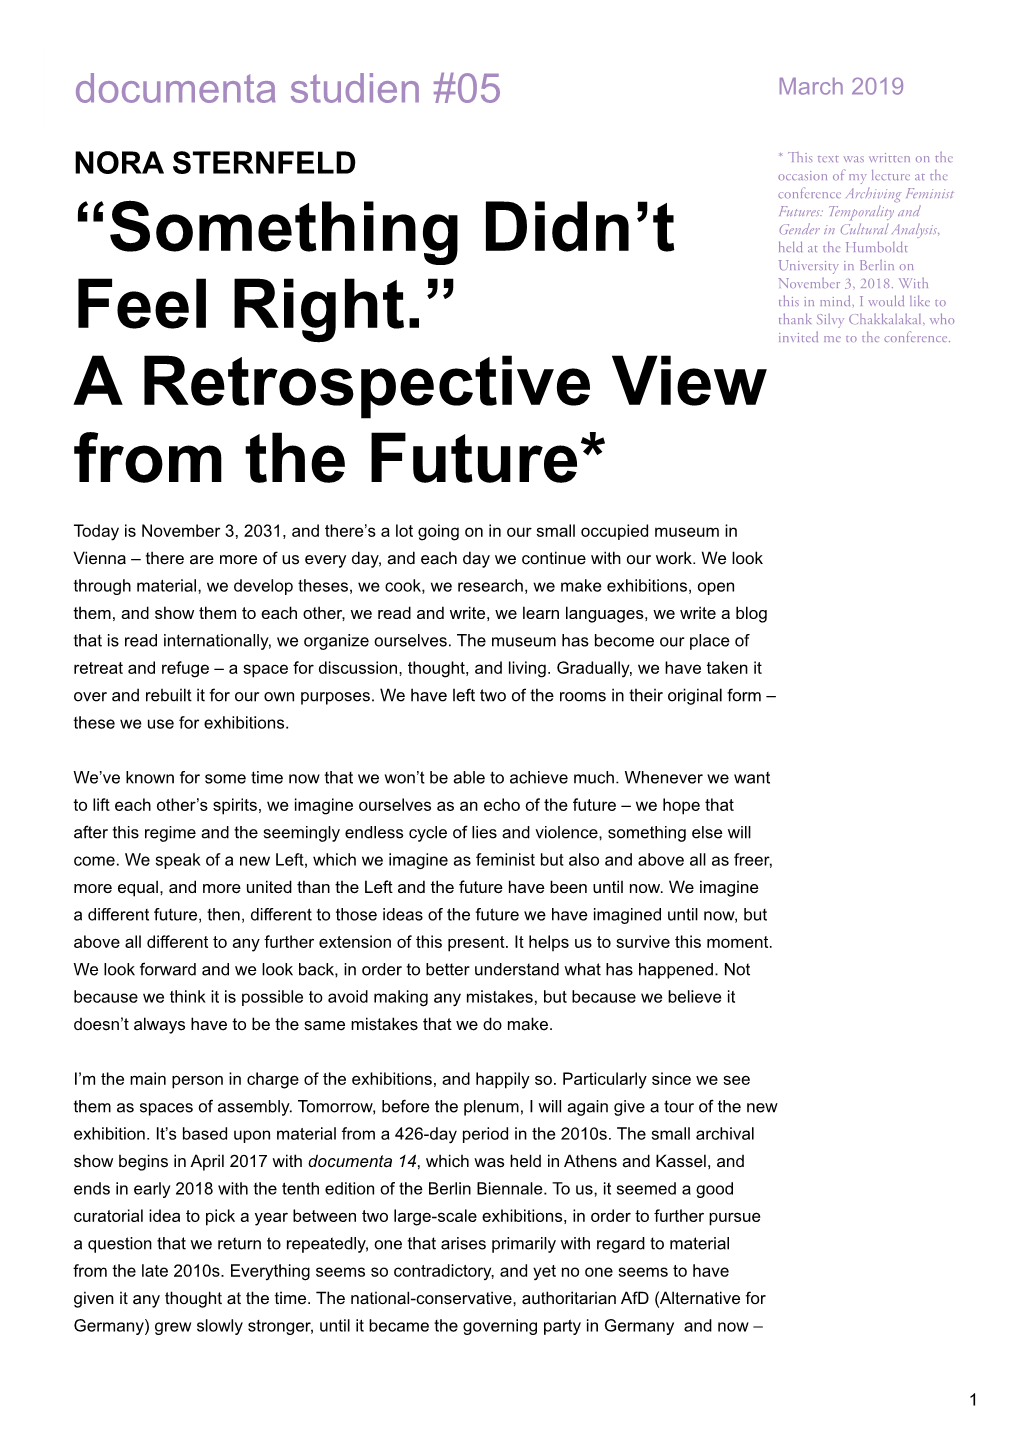 “Something Didn't Feel Right.” a Retrospective